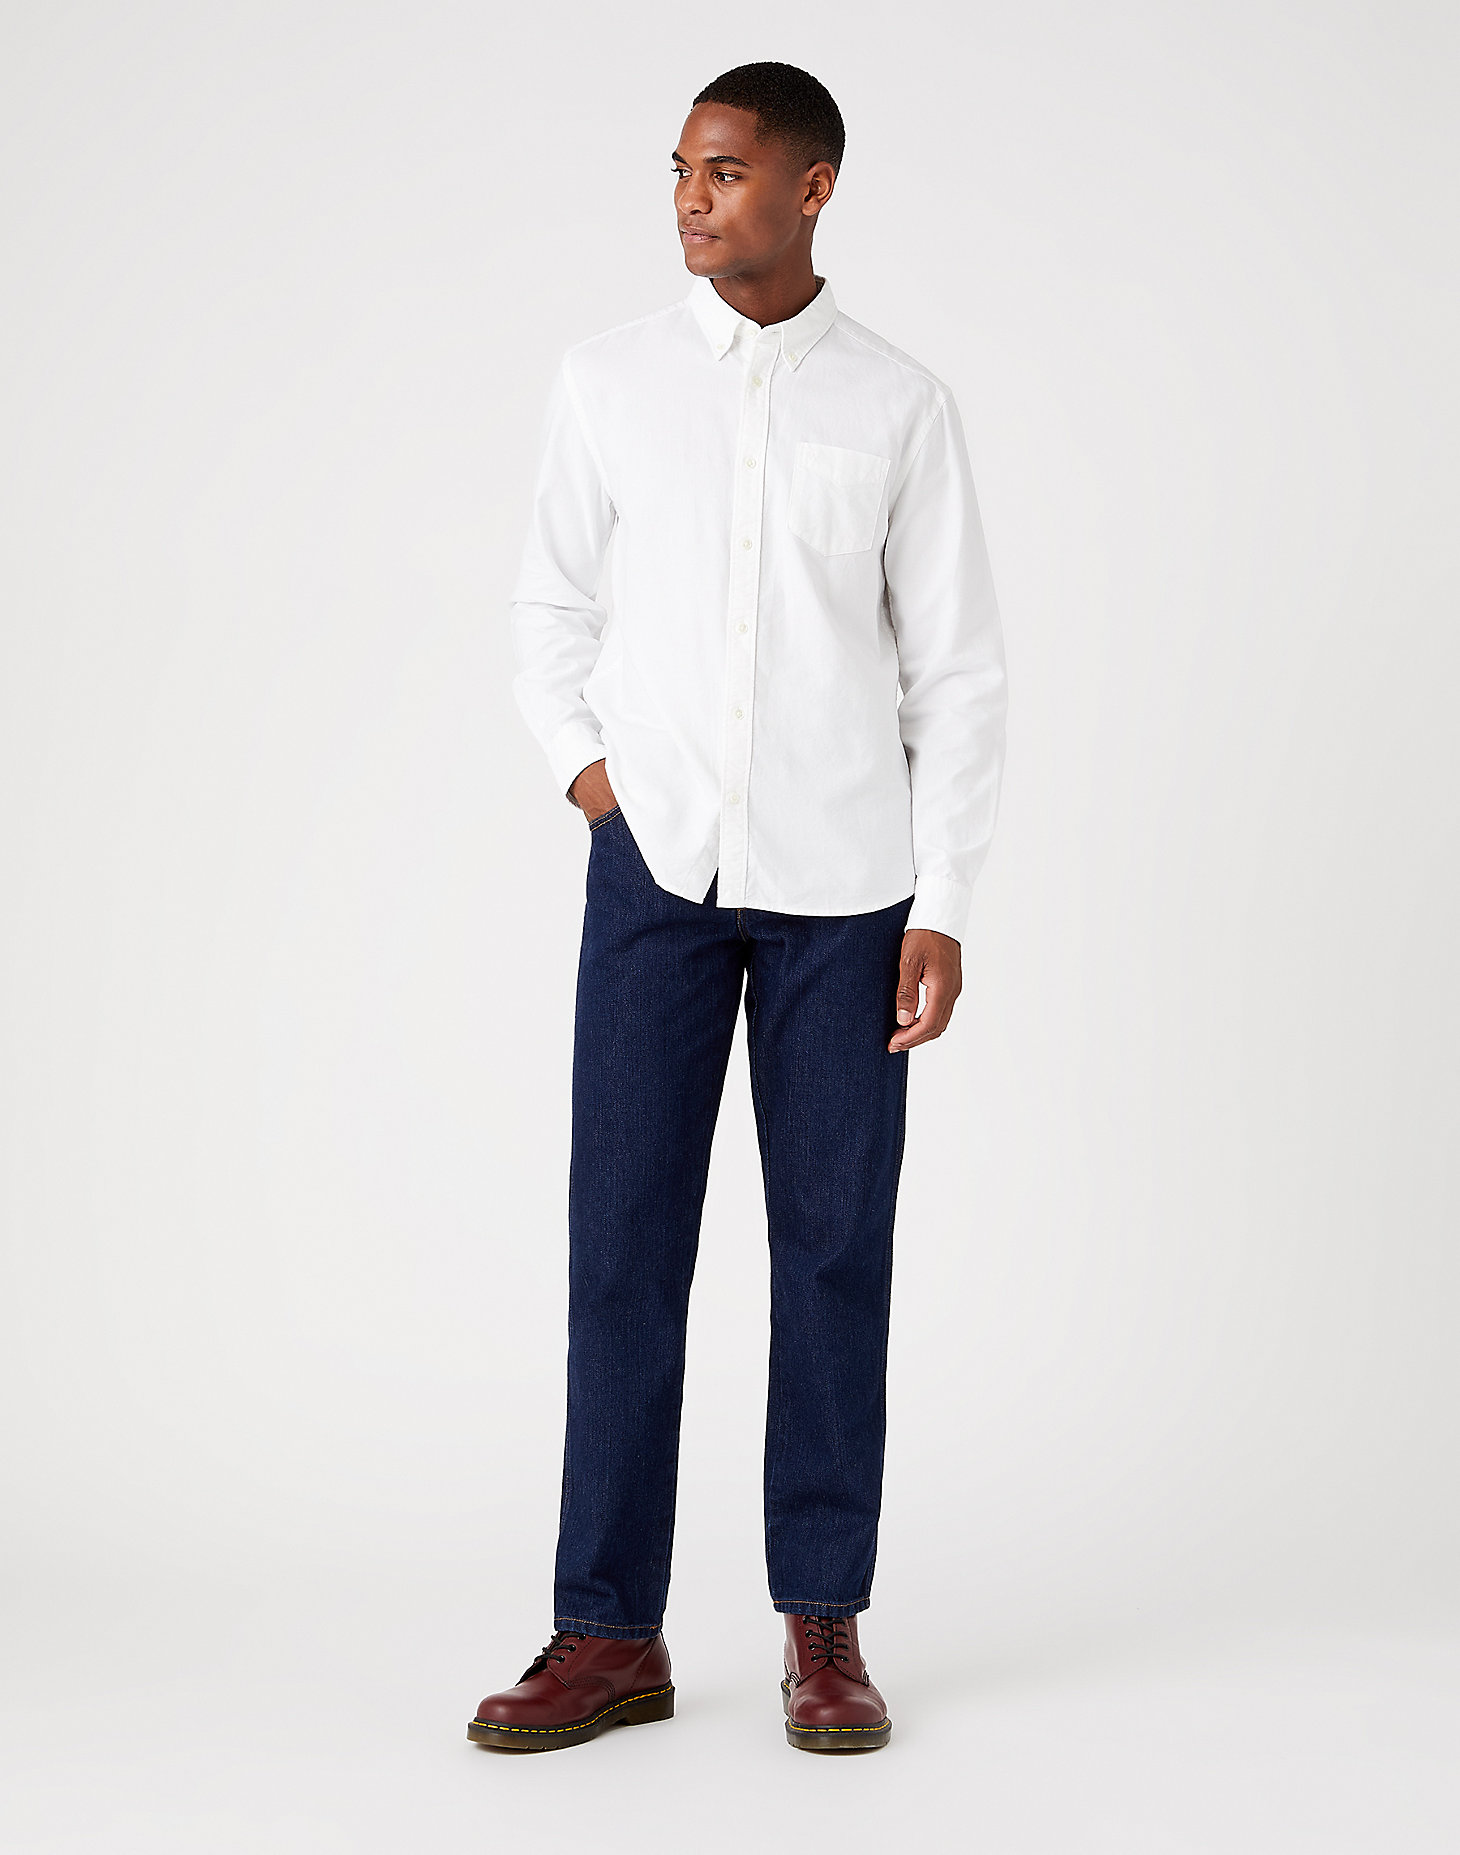 Long Sleeve One Pocket Button Down Shirt in White alternative view 1